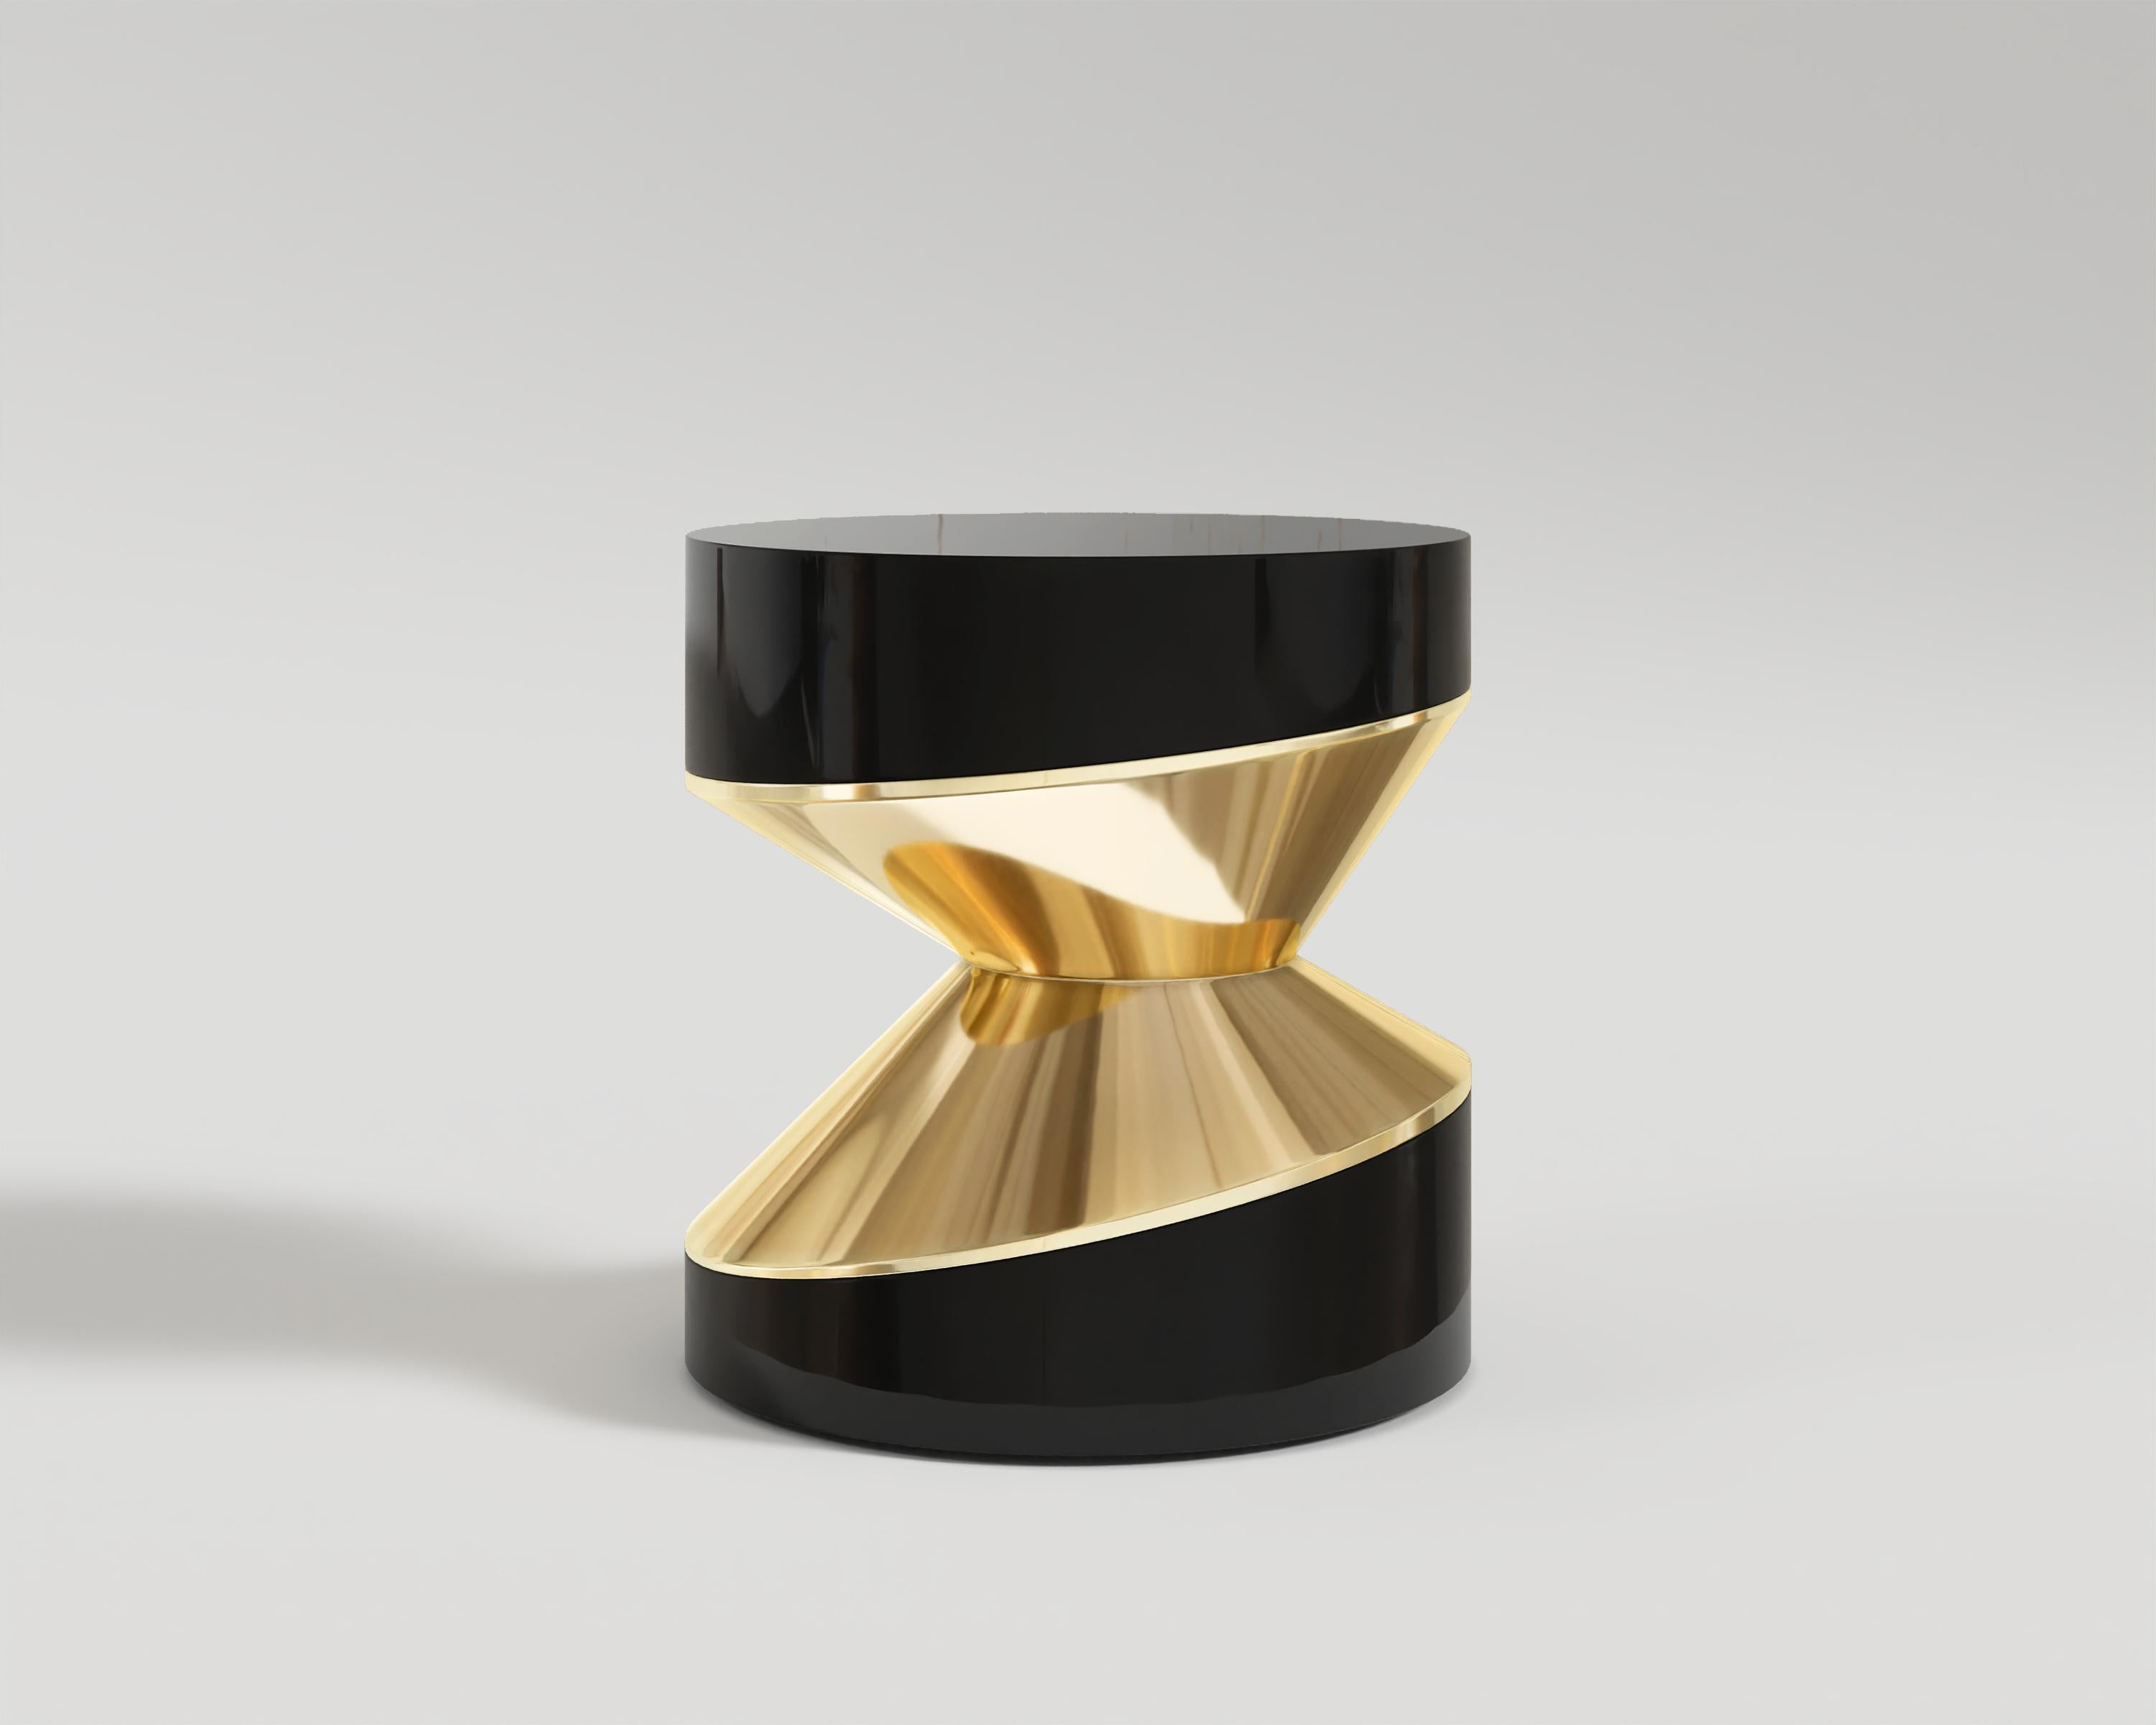 Linkage Side Table

Linkage Side Table: A bridge that connects the shape of a Form and the duty of a Function, the past of the Tradition and the present of the Modernity. The beautiful black lacquer rounds do a great job as base for them, while the